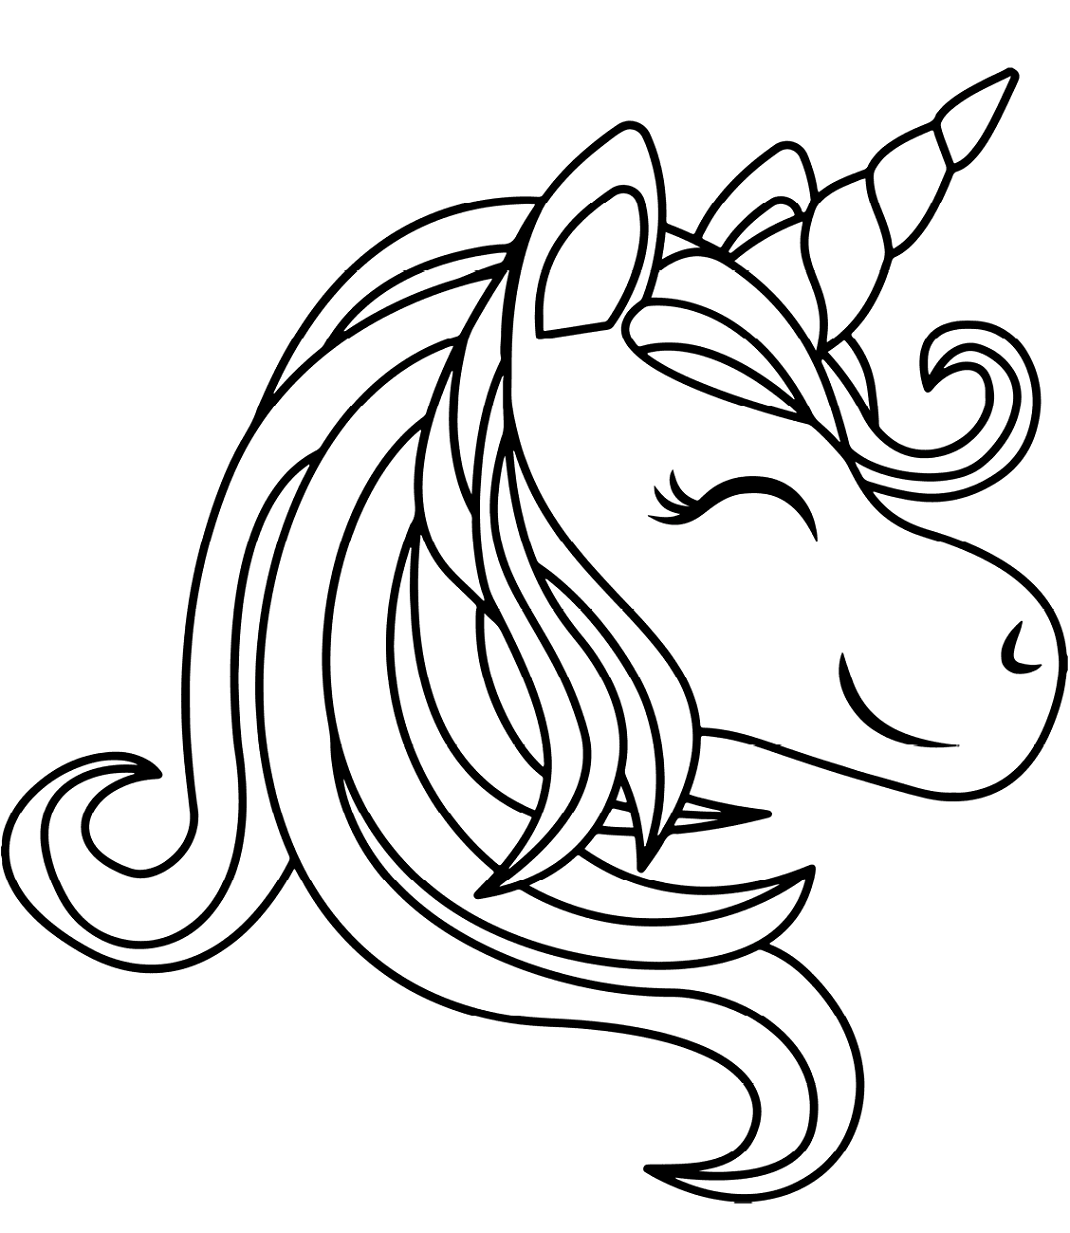 Unicorn Head Smiling Coloring Page